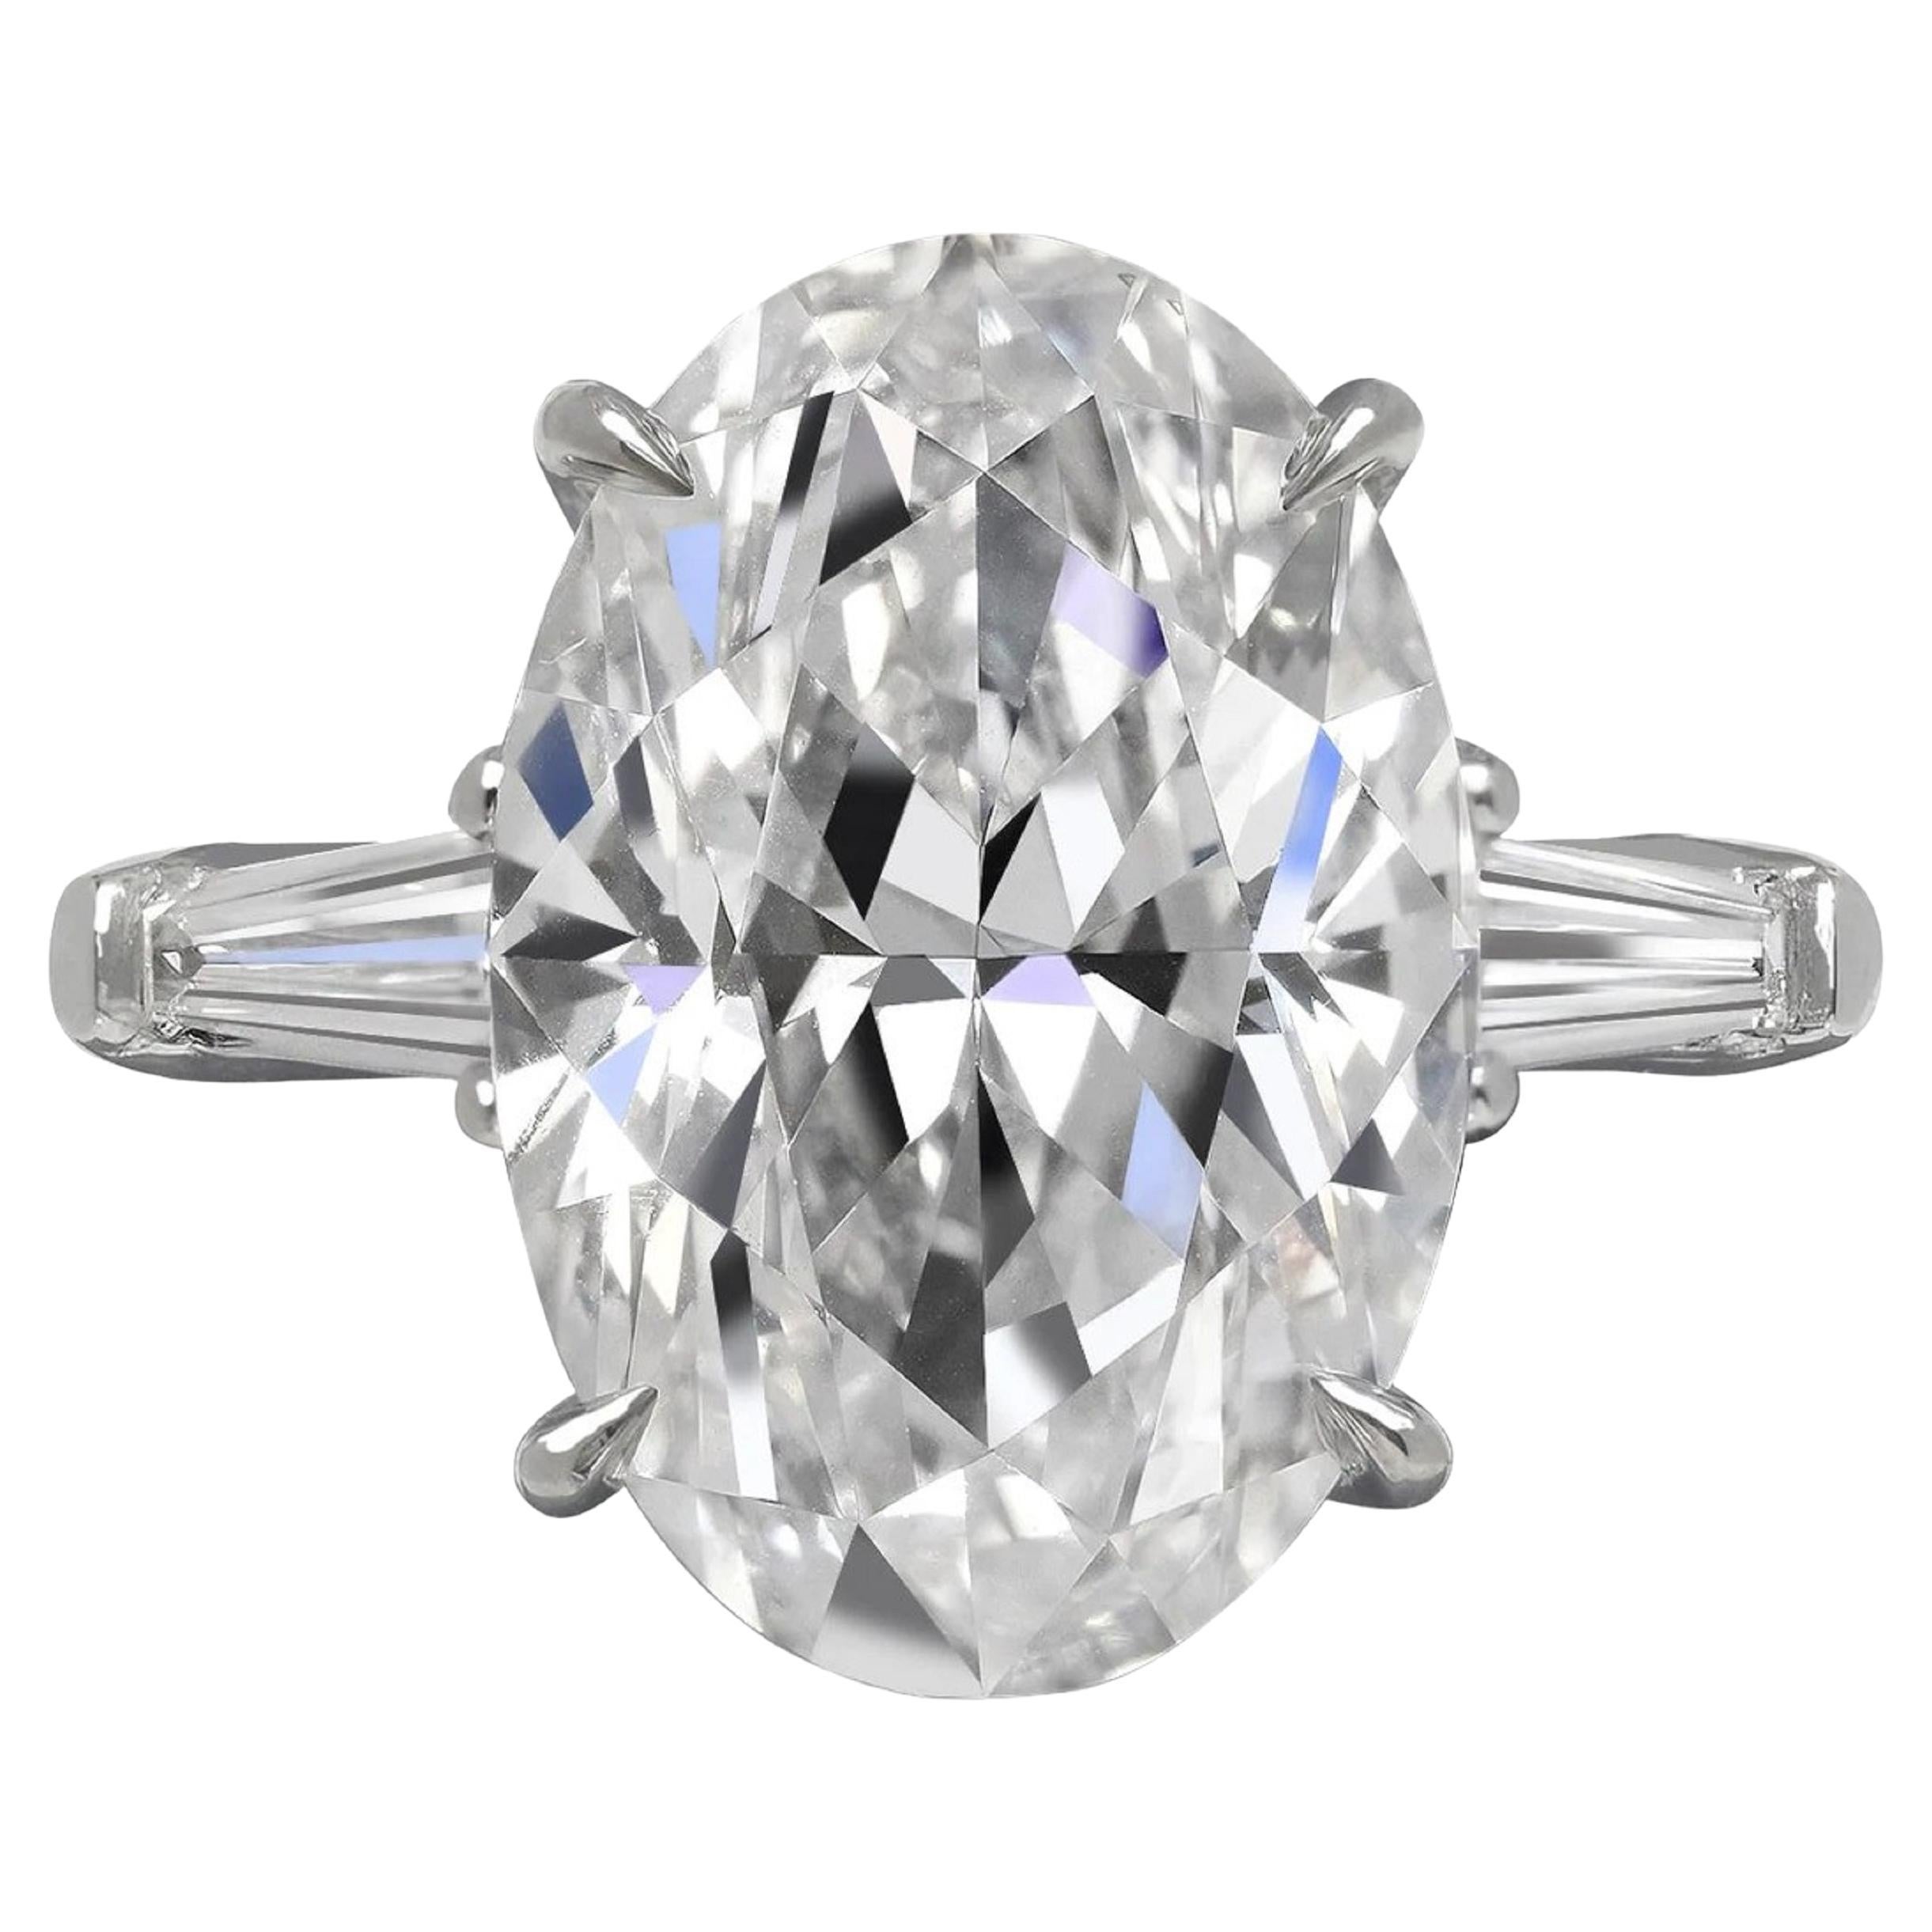 Exceptional GIA Certified 5 Carat Oval Diamond Ring For Sale